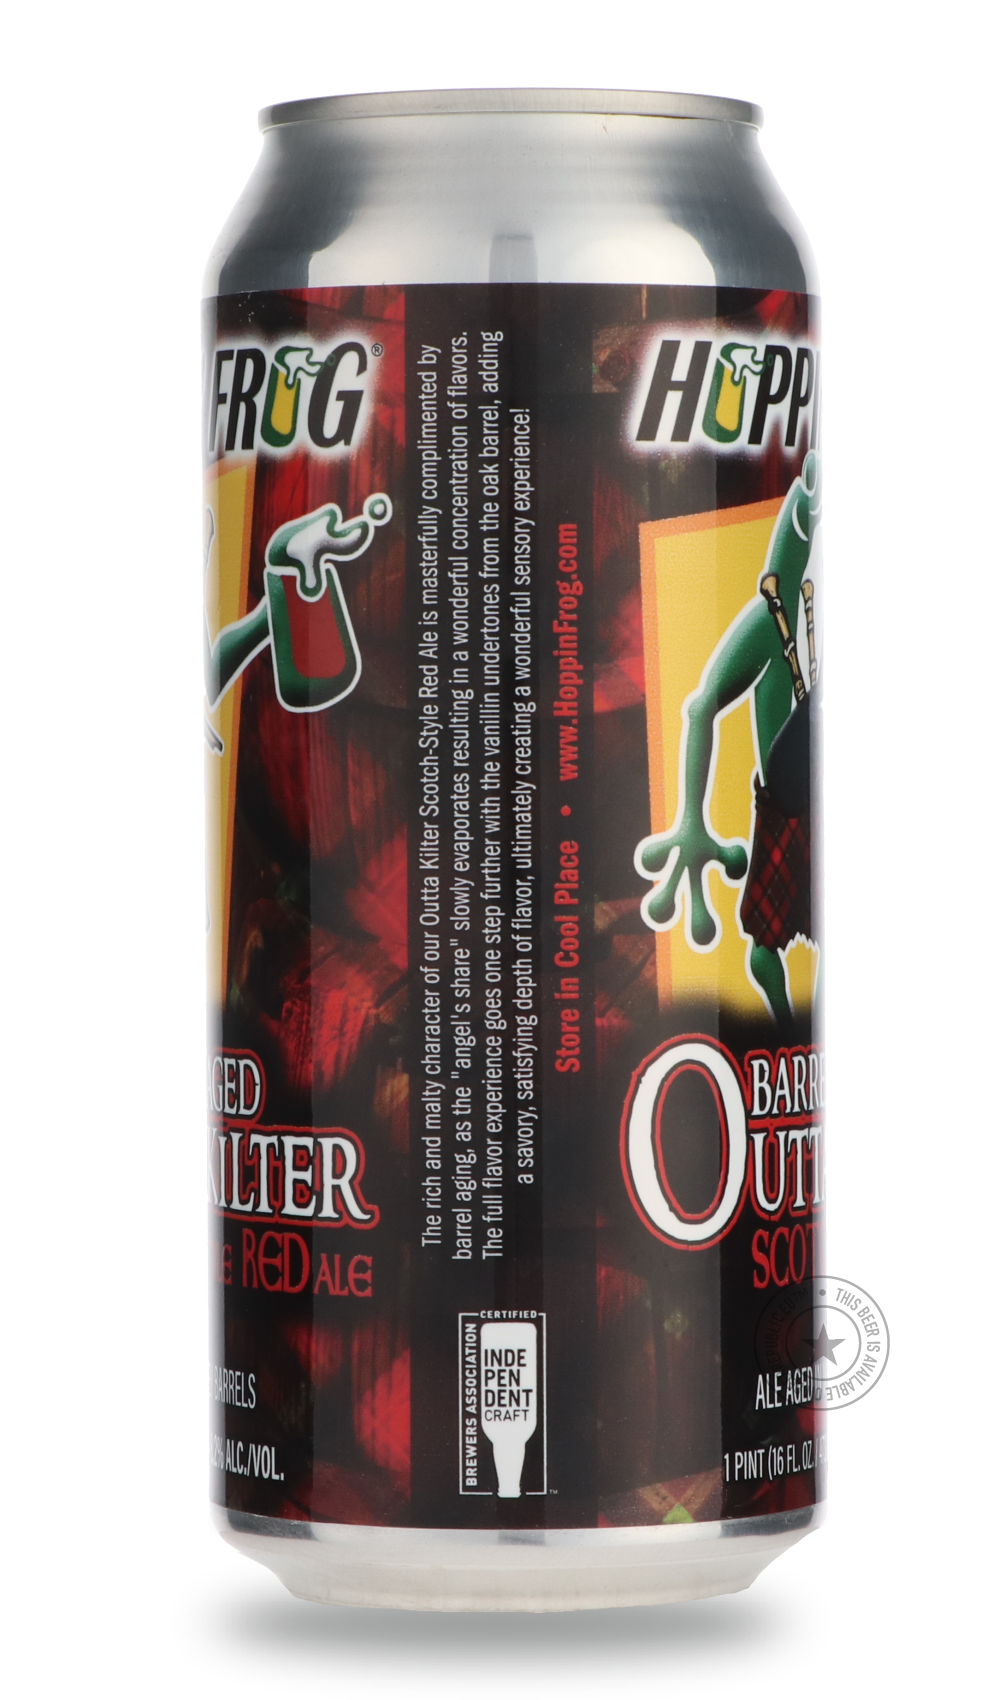 -Hoppin' Frog- Barrel Aged Outta Kilter Scotch-Style Red Ale-Brown & Dark- Only @ Beer Republic - The best online beer store for American & Canadian craft beer - Buy beer online from the USA and Canada - Bier online kopen - Amerikaans bier kopen - Craft beer store - Craft beer kopen - Amerikanisch bier kaufen - Bier online kaufen - Acheter biere online - IPA - Stout - Porter - New England IPA - Hazy IPA - Imperial Stout - Barrel Aged - Barrel Aged Imperial Stout - Brown - Dark beer - Blond - Blonde - Pilsne